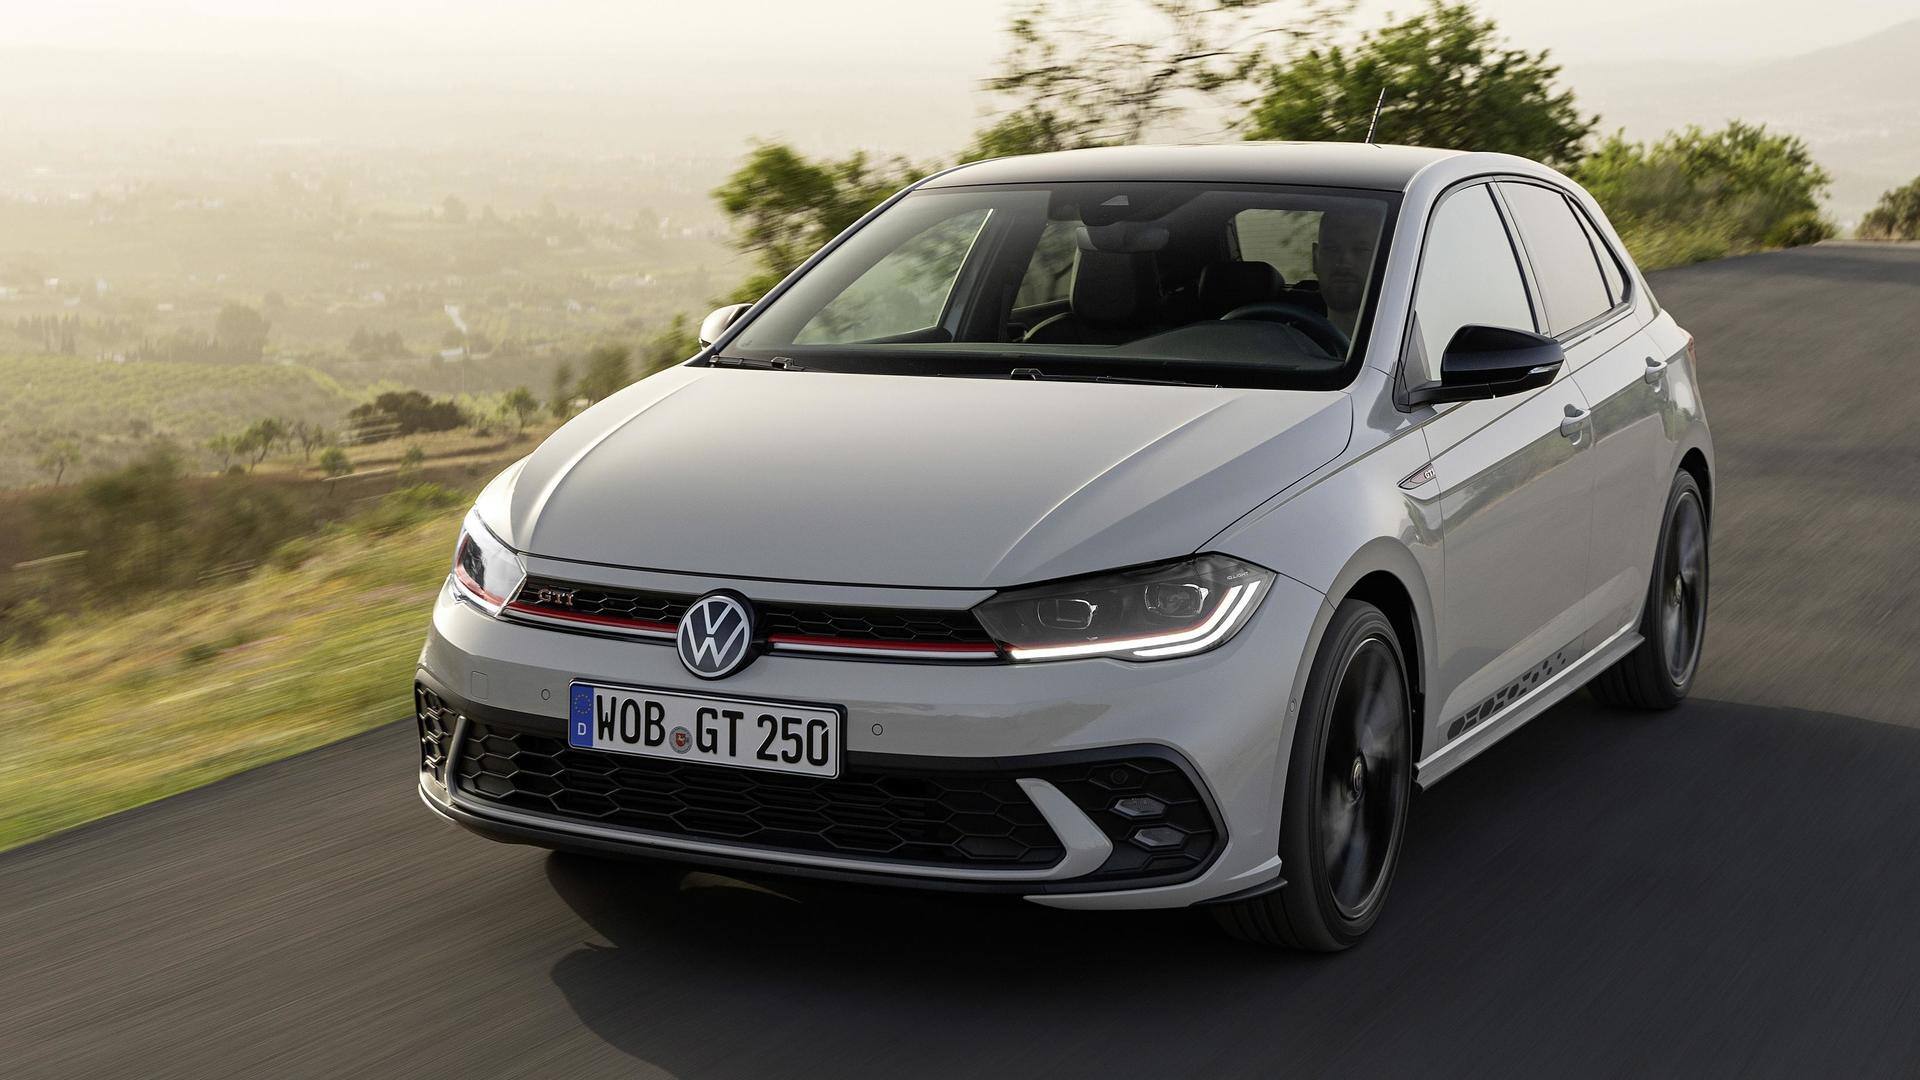 25 years of Volkswagen Polo GTI: How has it evolved